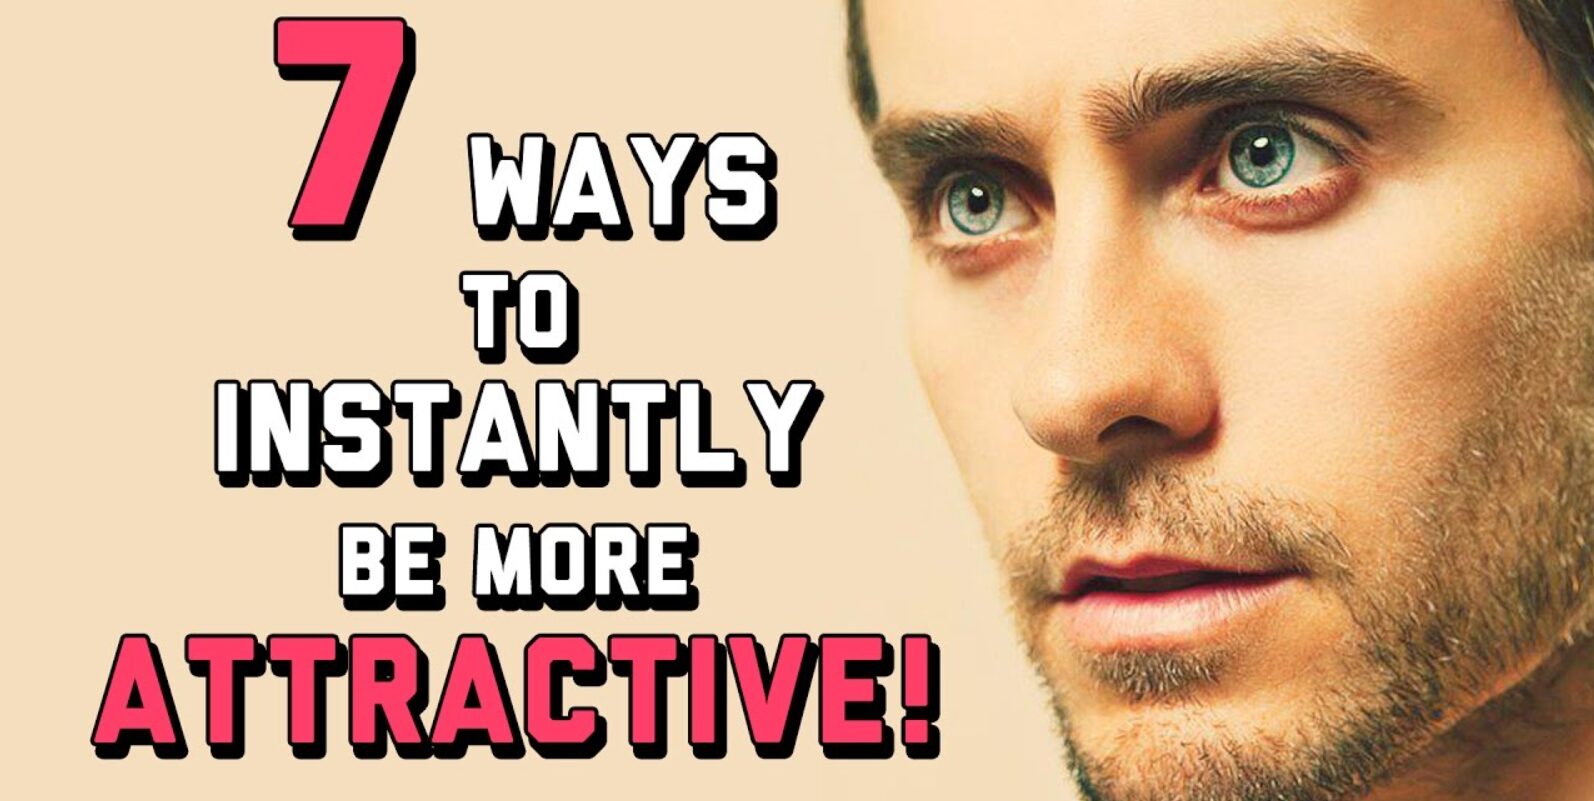 Top 7 Ways to Become More Attractive -2022